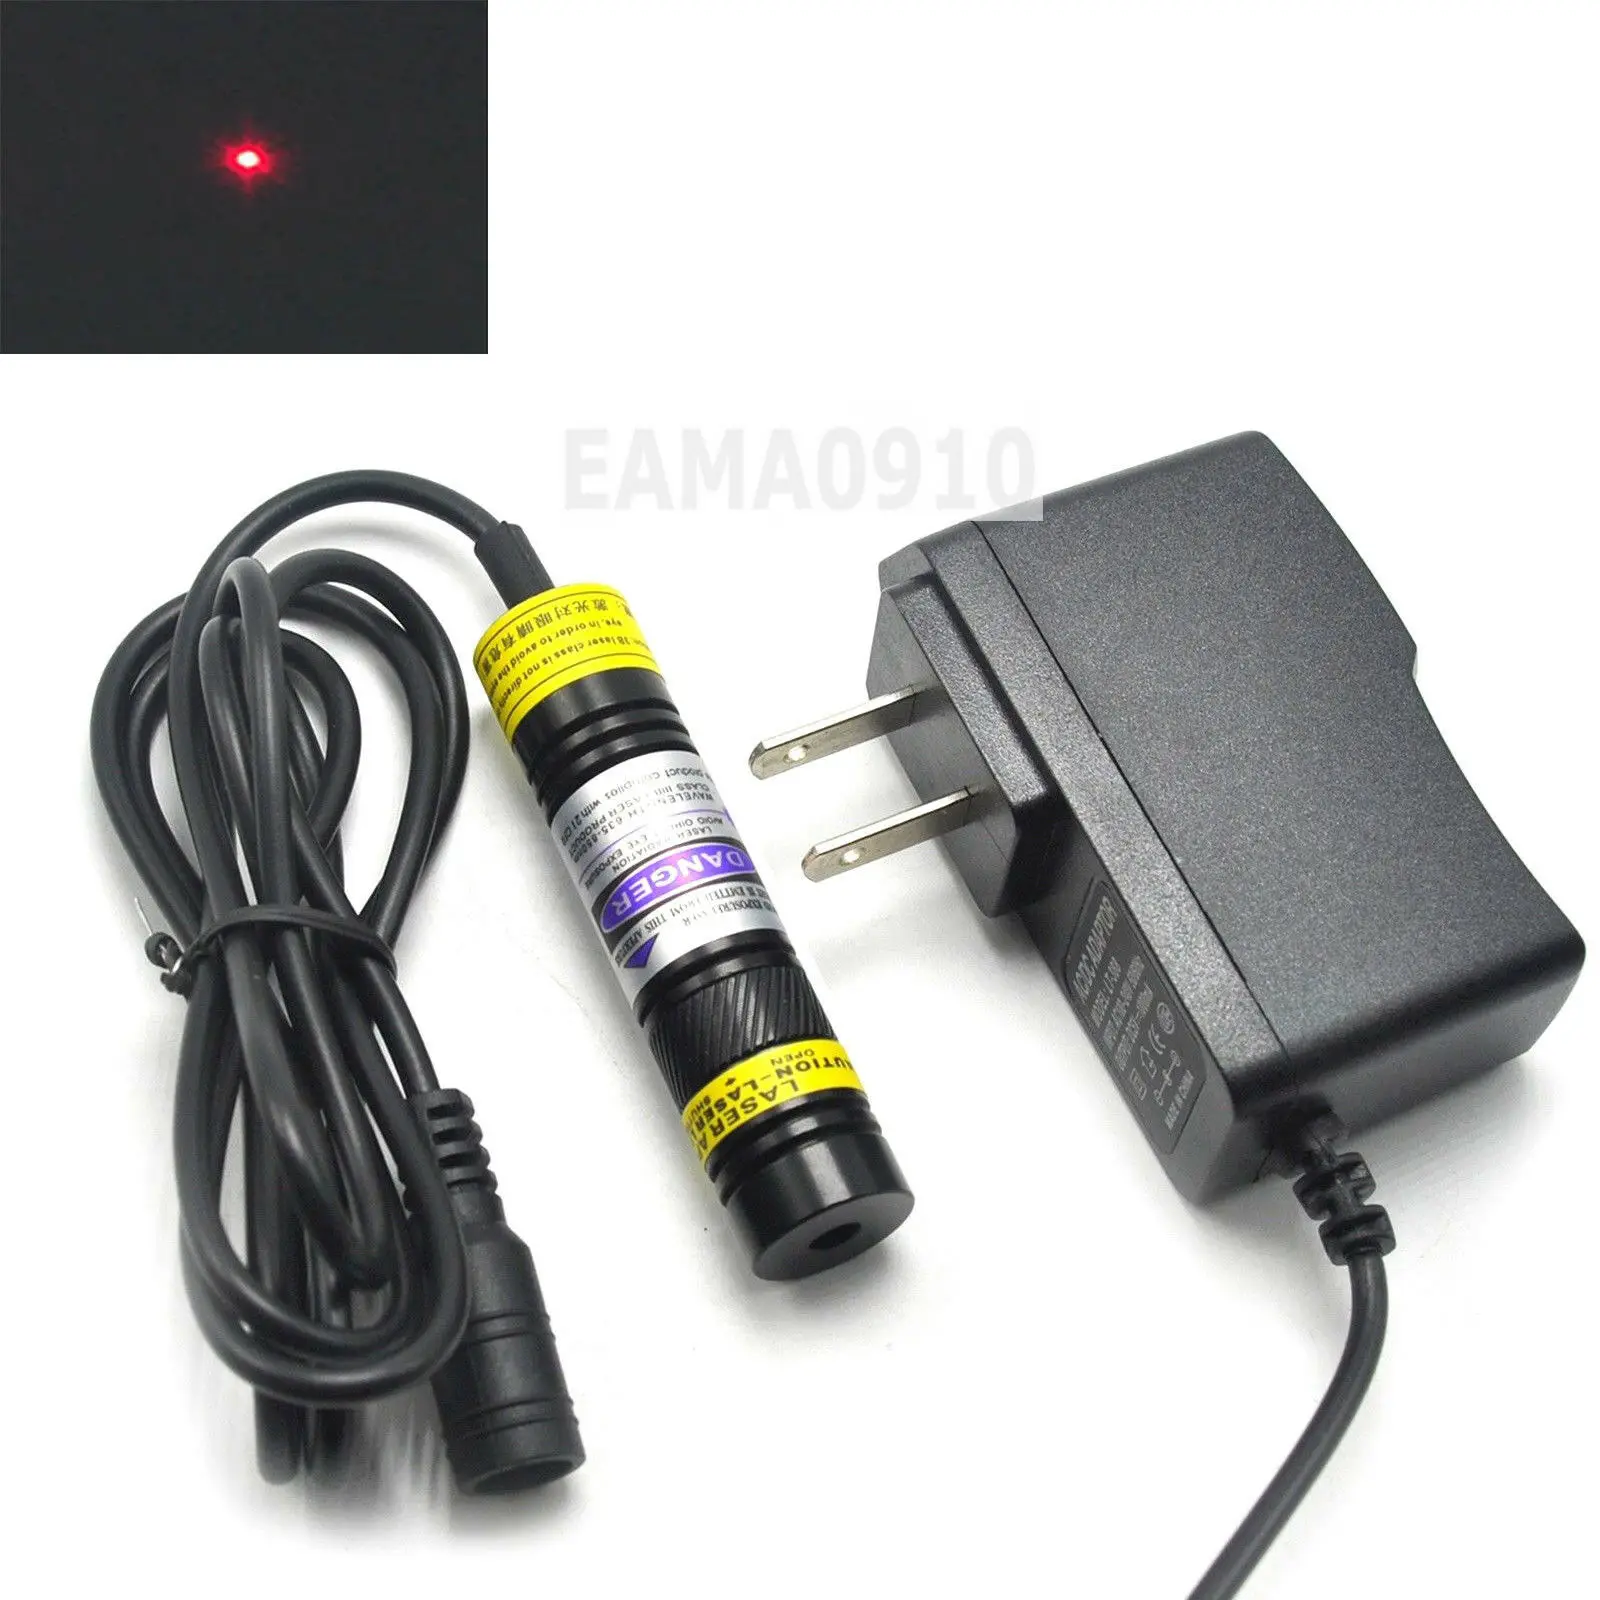 Focusable 650nm 250mW 16X68mm Red Dot Mitsubishi Diode Laser Module w/5V Adapter